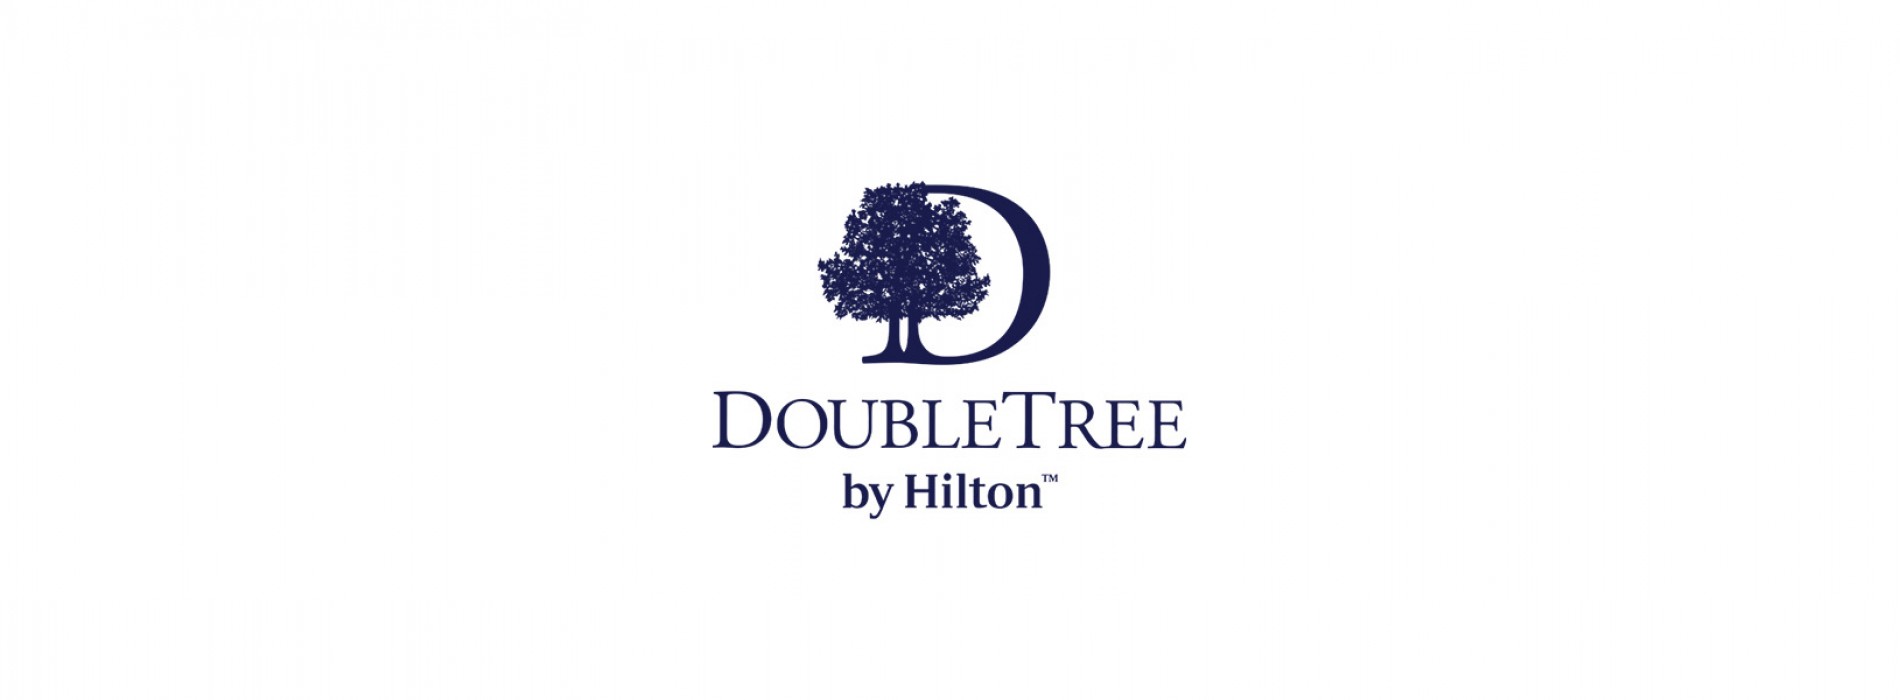 DoubleTree by Hilton Gurugram Baani Square announces promotion of Apoorva Chandram as Rooms Division Manager